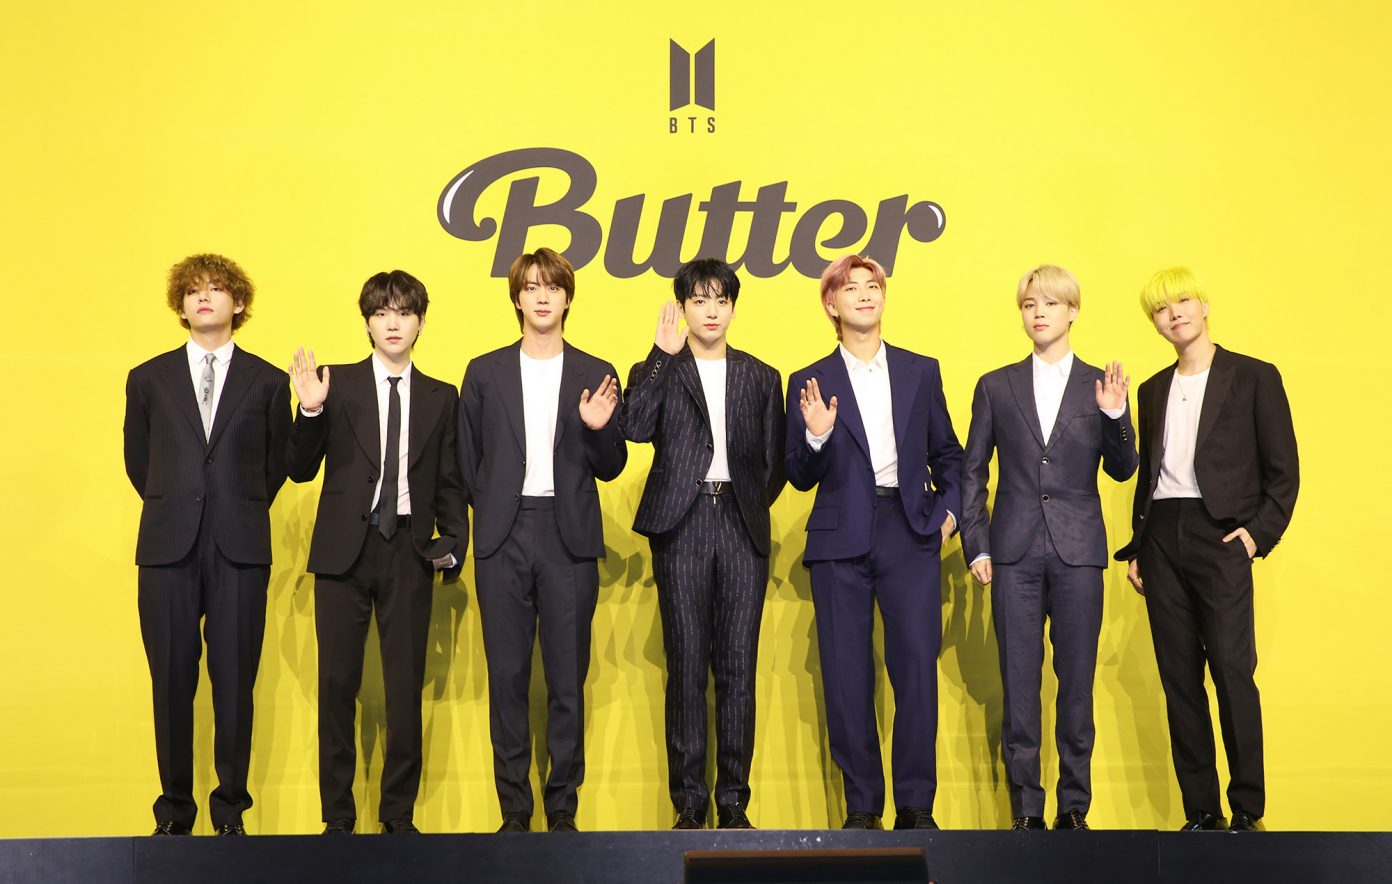 Butter by BTS breaks YouTube and Spotify day-one streaming records